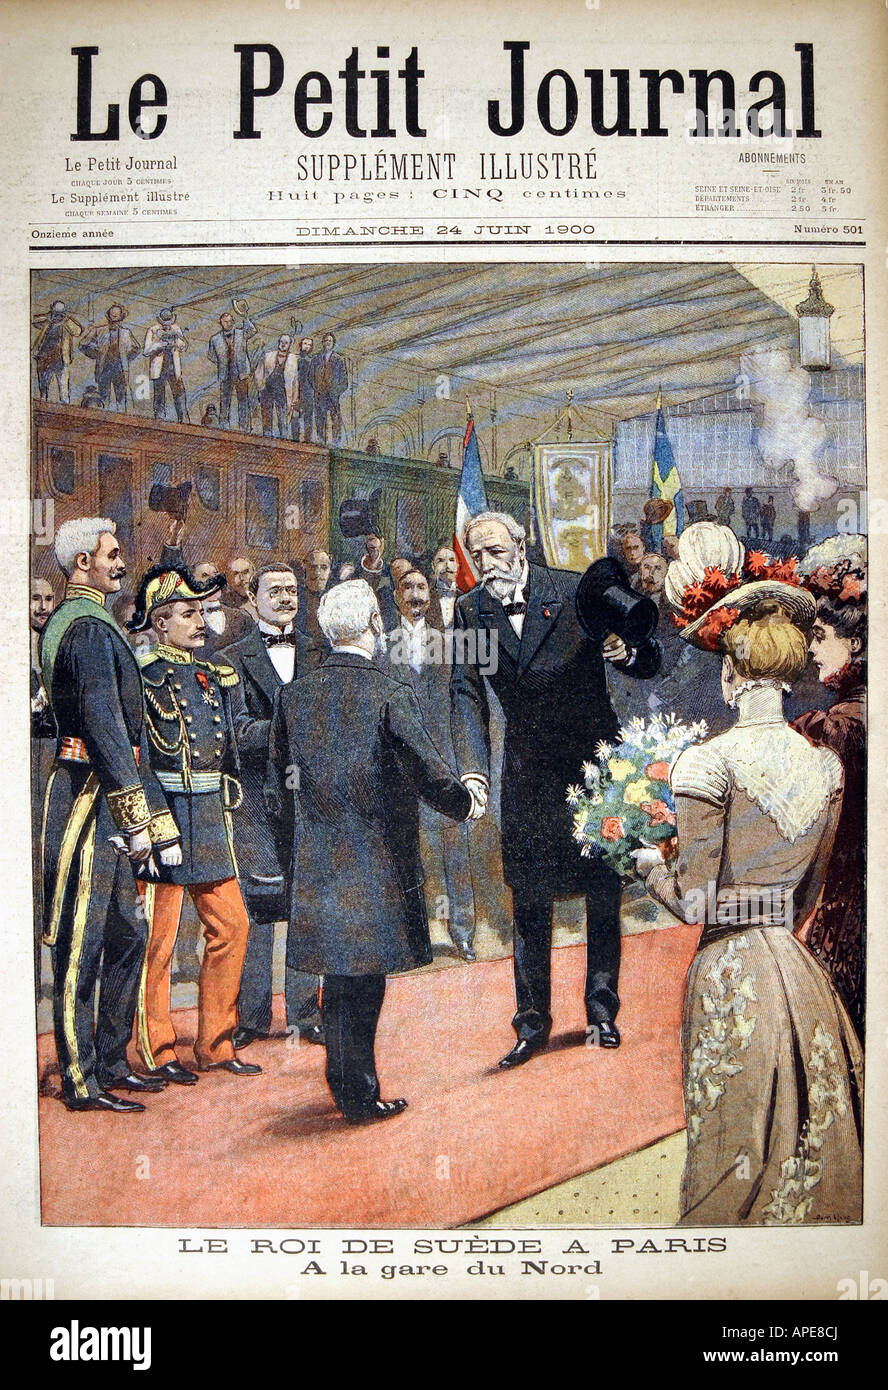 press/media, magazines, 'Le Petit Journal', Paris, 11. volume, number 501, illustrated supplement, Sunday 24 June 1900, title, 'The king of Sweden in Paris', , Stock Photo